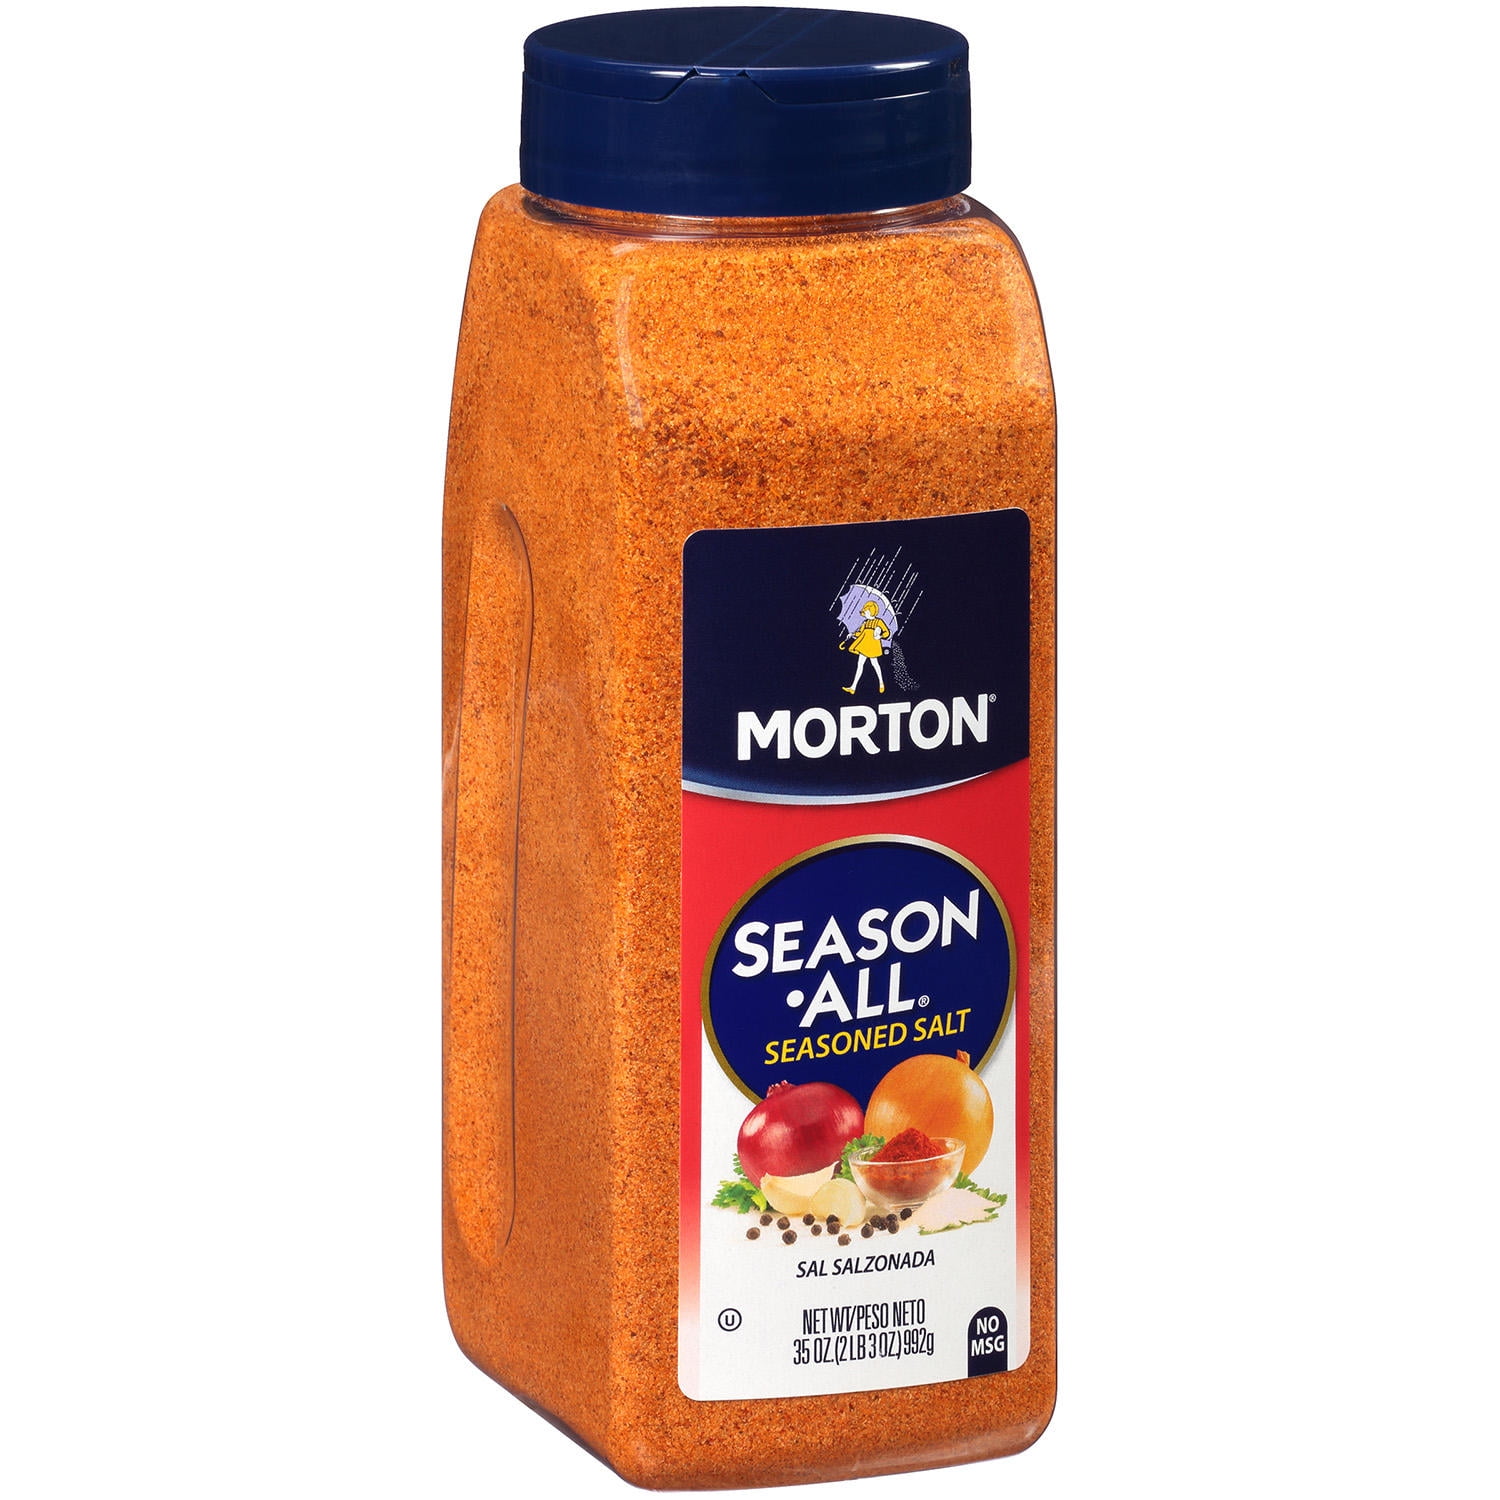  Morton Season-All Seasoned Salt, 16 Ounce Canister (Pack of 6)  : Mixed Spices And Seasonings : Grocery & Gourmet Food